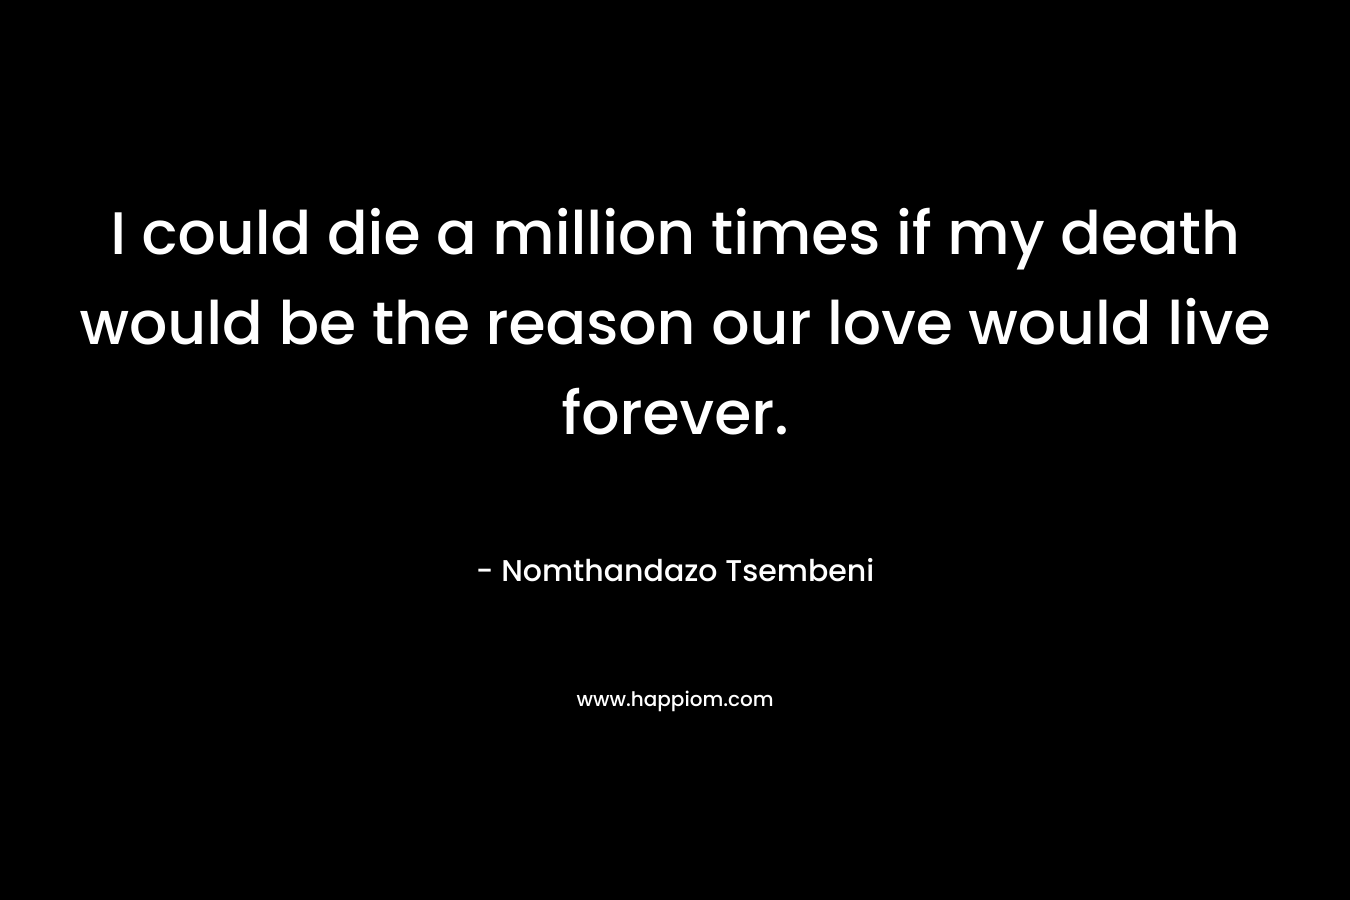 I could die a million times if my death would be the reason our love would live forever. – Nomthandazo Tsembeni